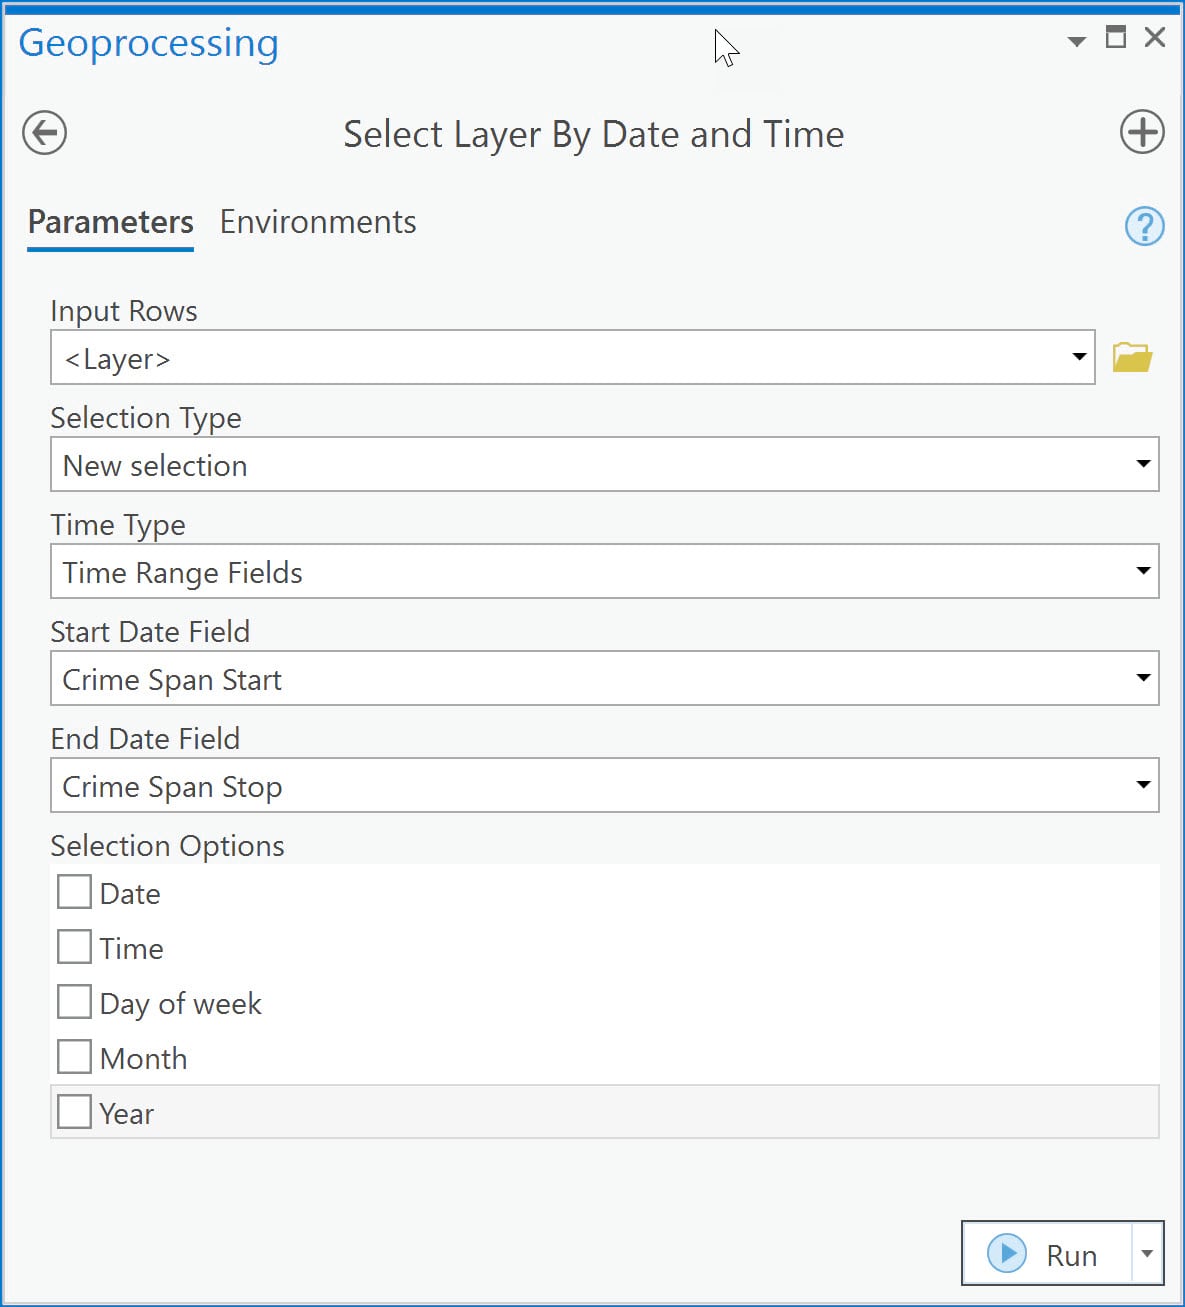 Select Layer By Date and Time geoprocessing tool.